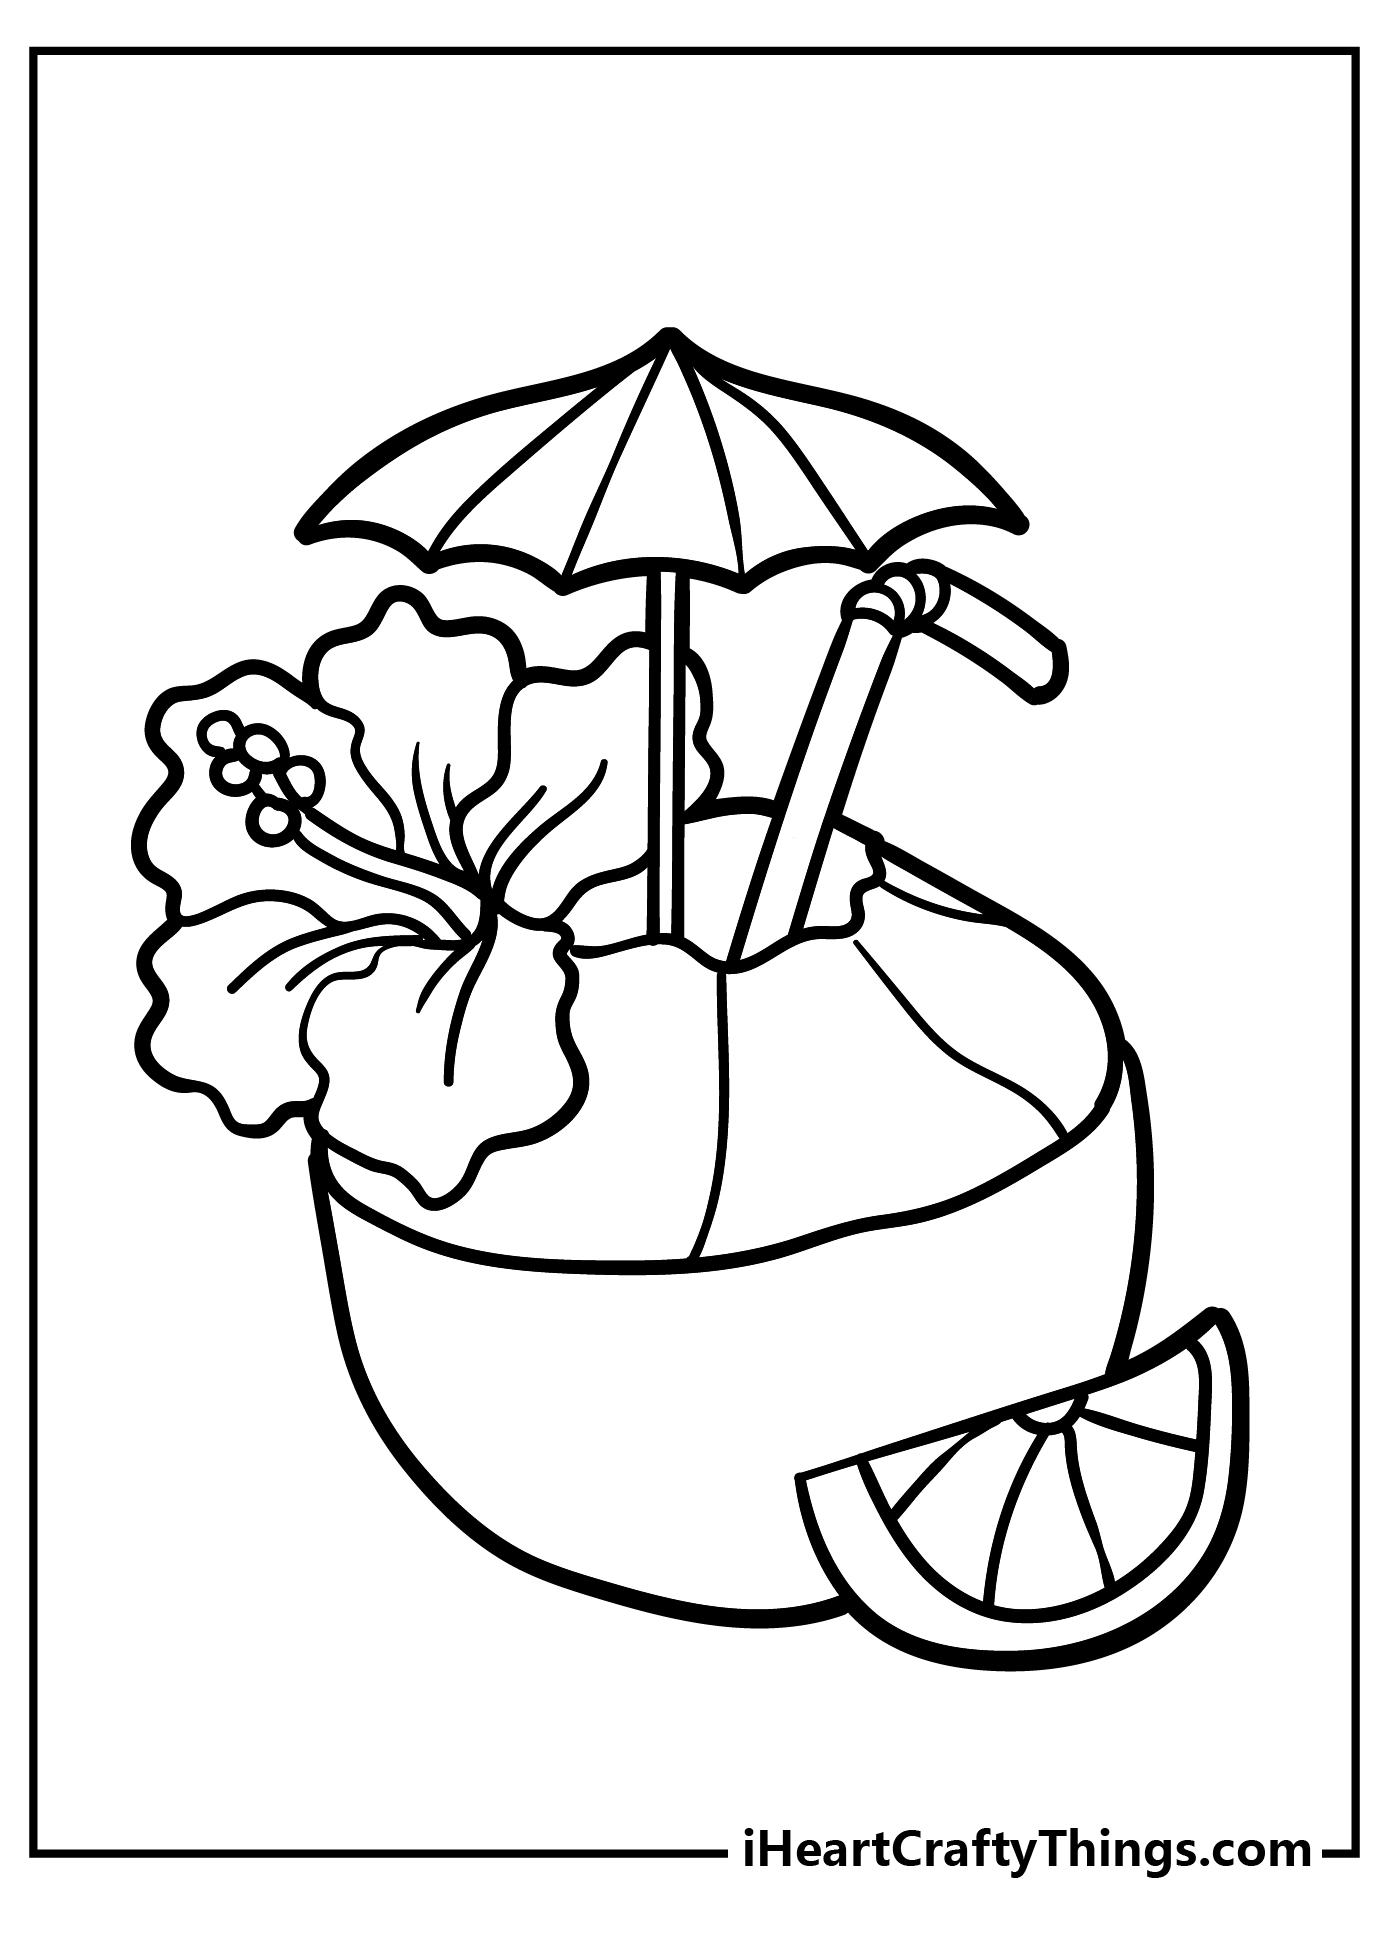 Tropical Coloring Sheet for children free download